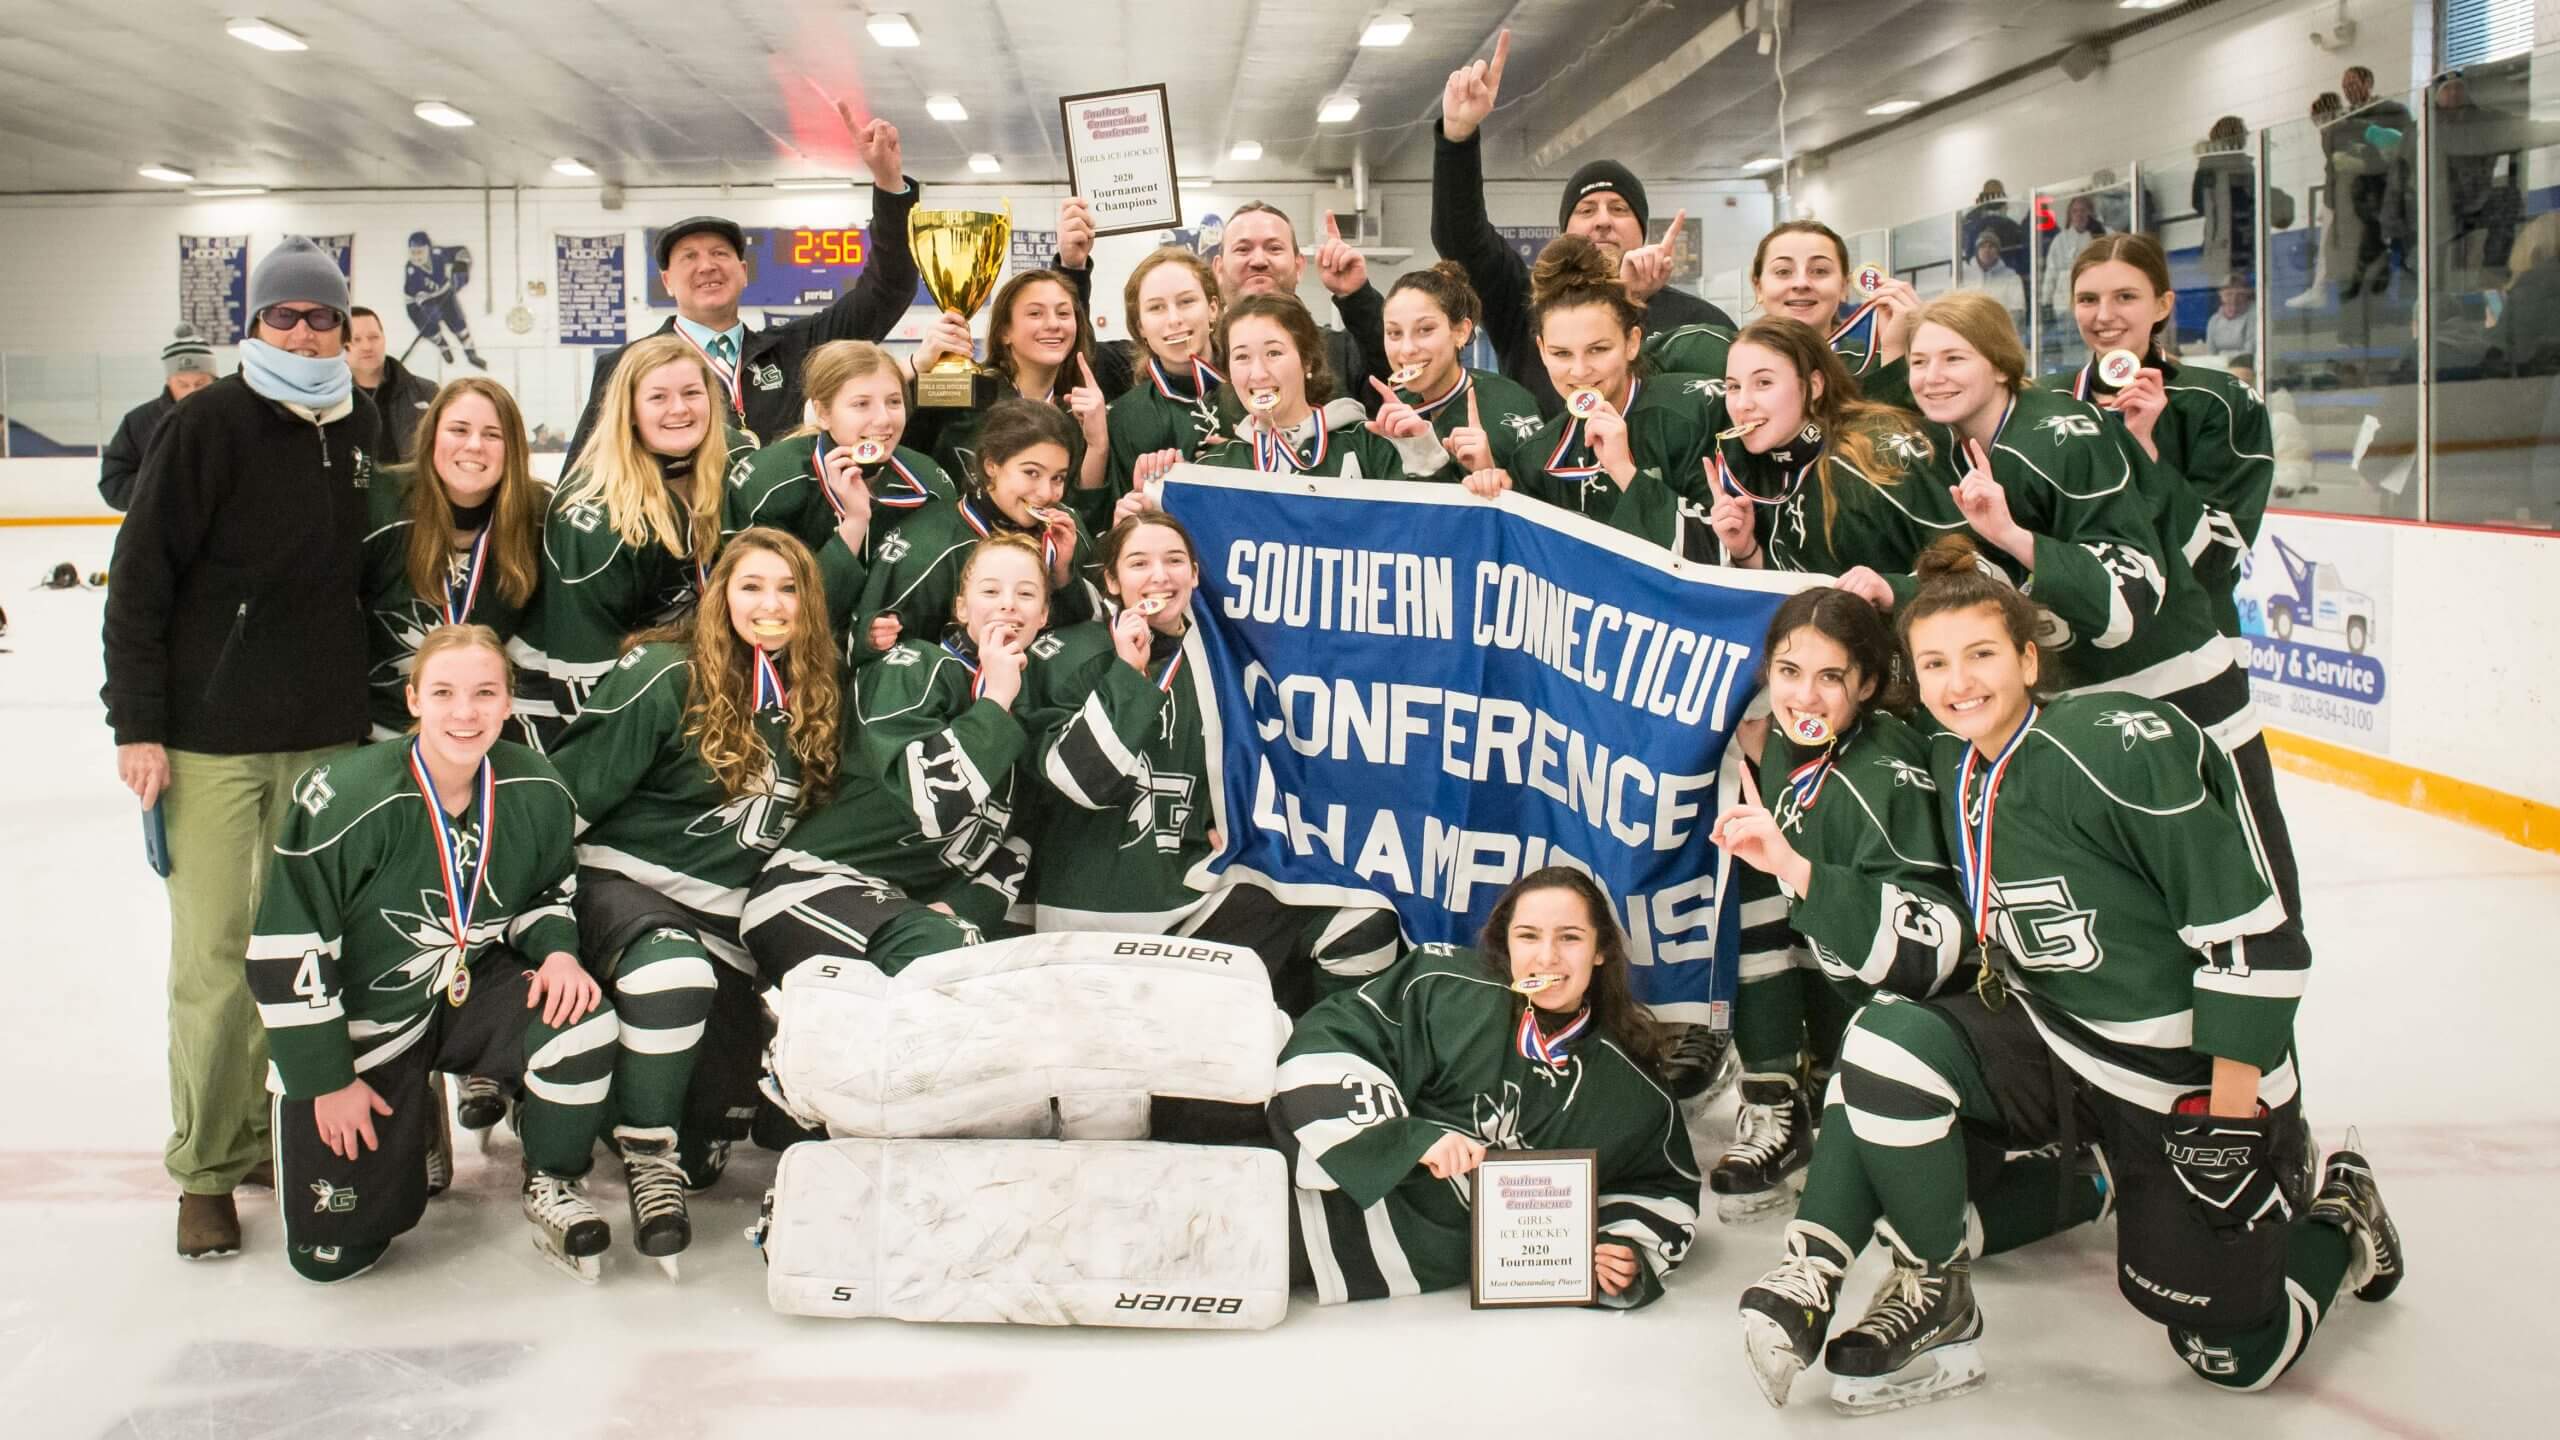 Young female hockey players in uniform positioned in a group photo beside several adults in casual clothing. Everyone is smiling and a trophy is held up by a player. The girls hold up a sign that reads 